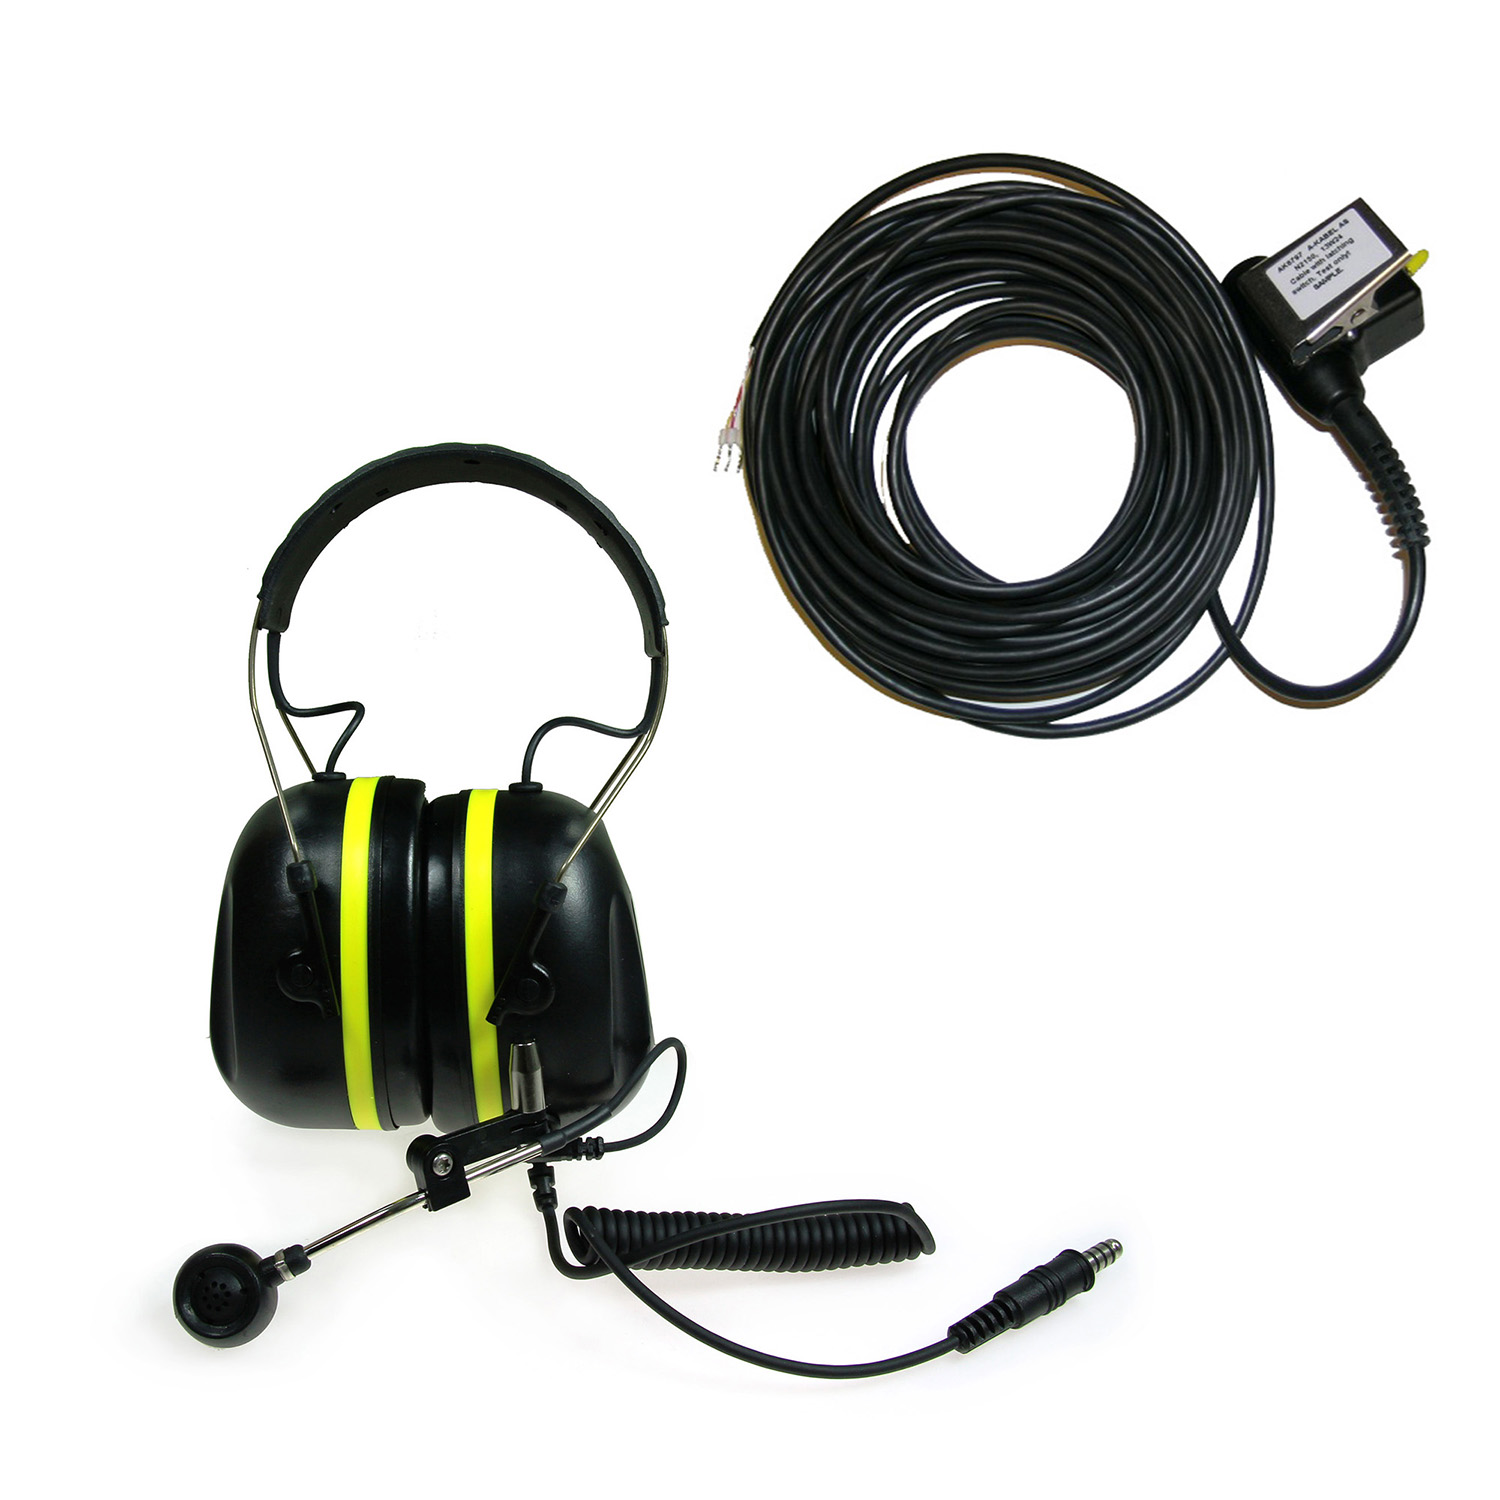 2330040029 VSP-512-AKHS-20 Headset with headband ATEX zone 1 incl. 20m cable